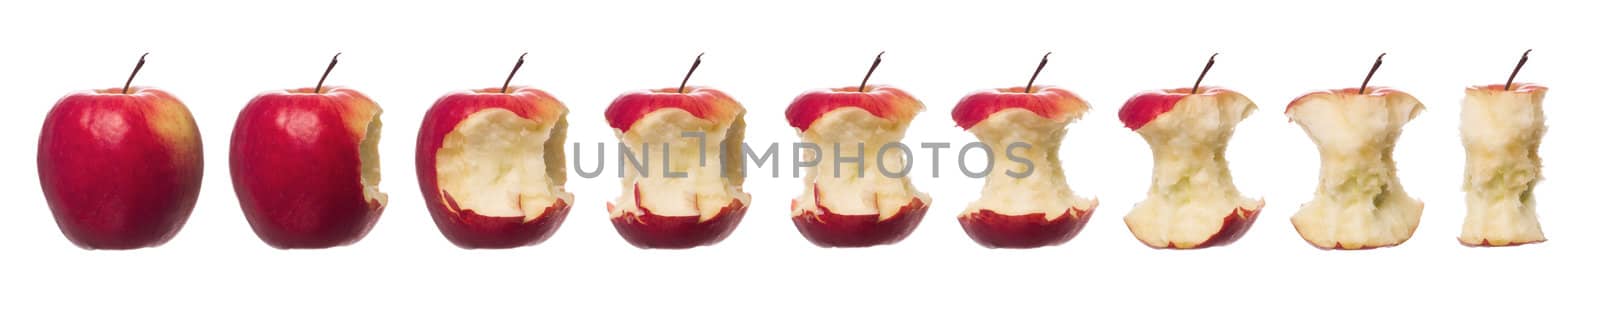 Red apples in progress towards white background by gemenacom